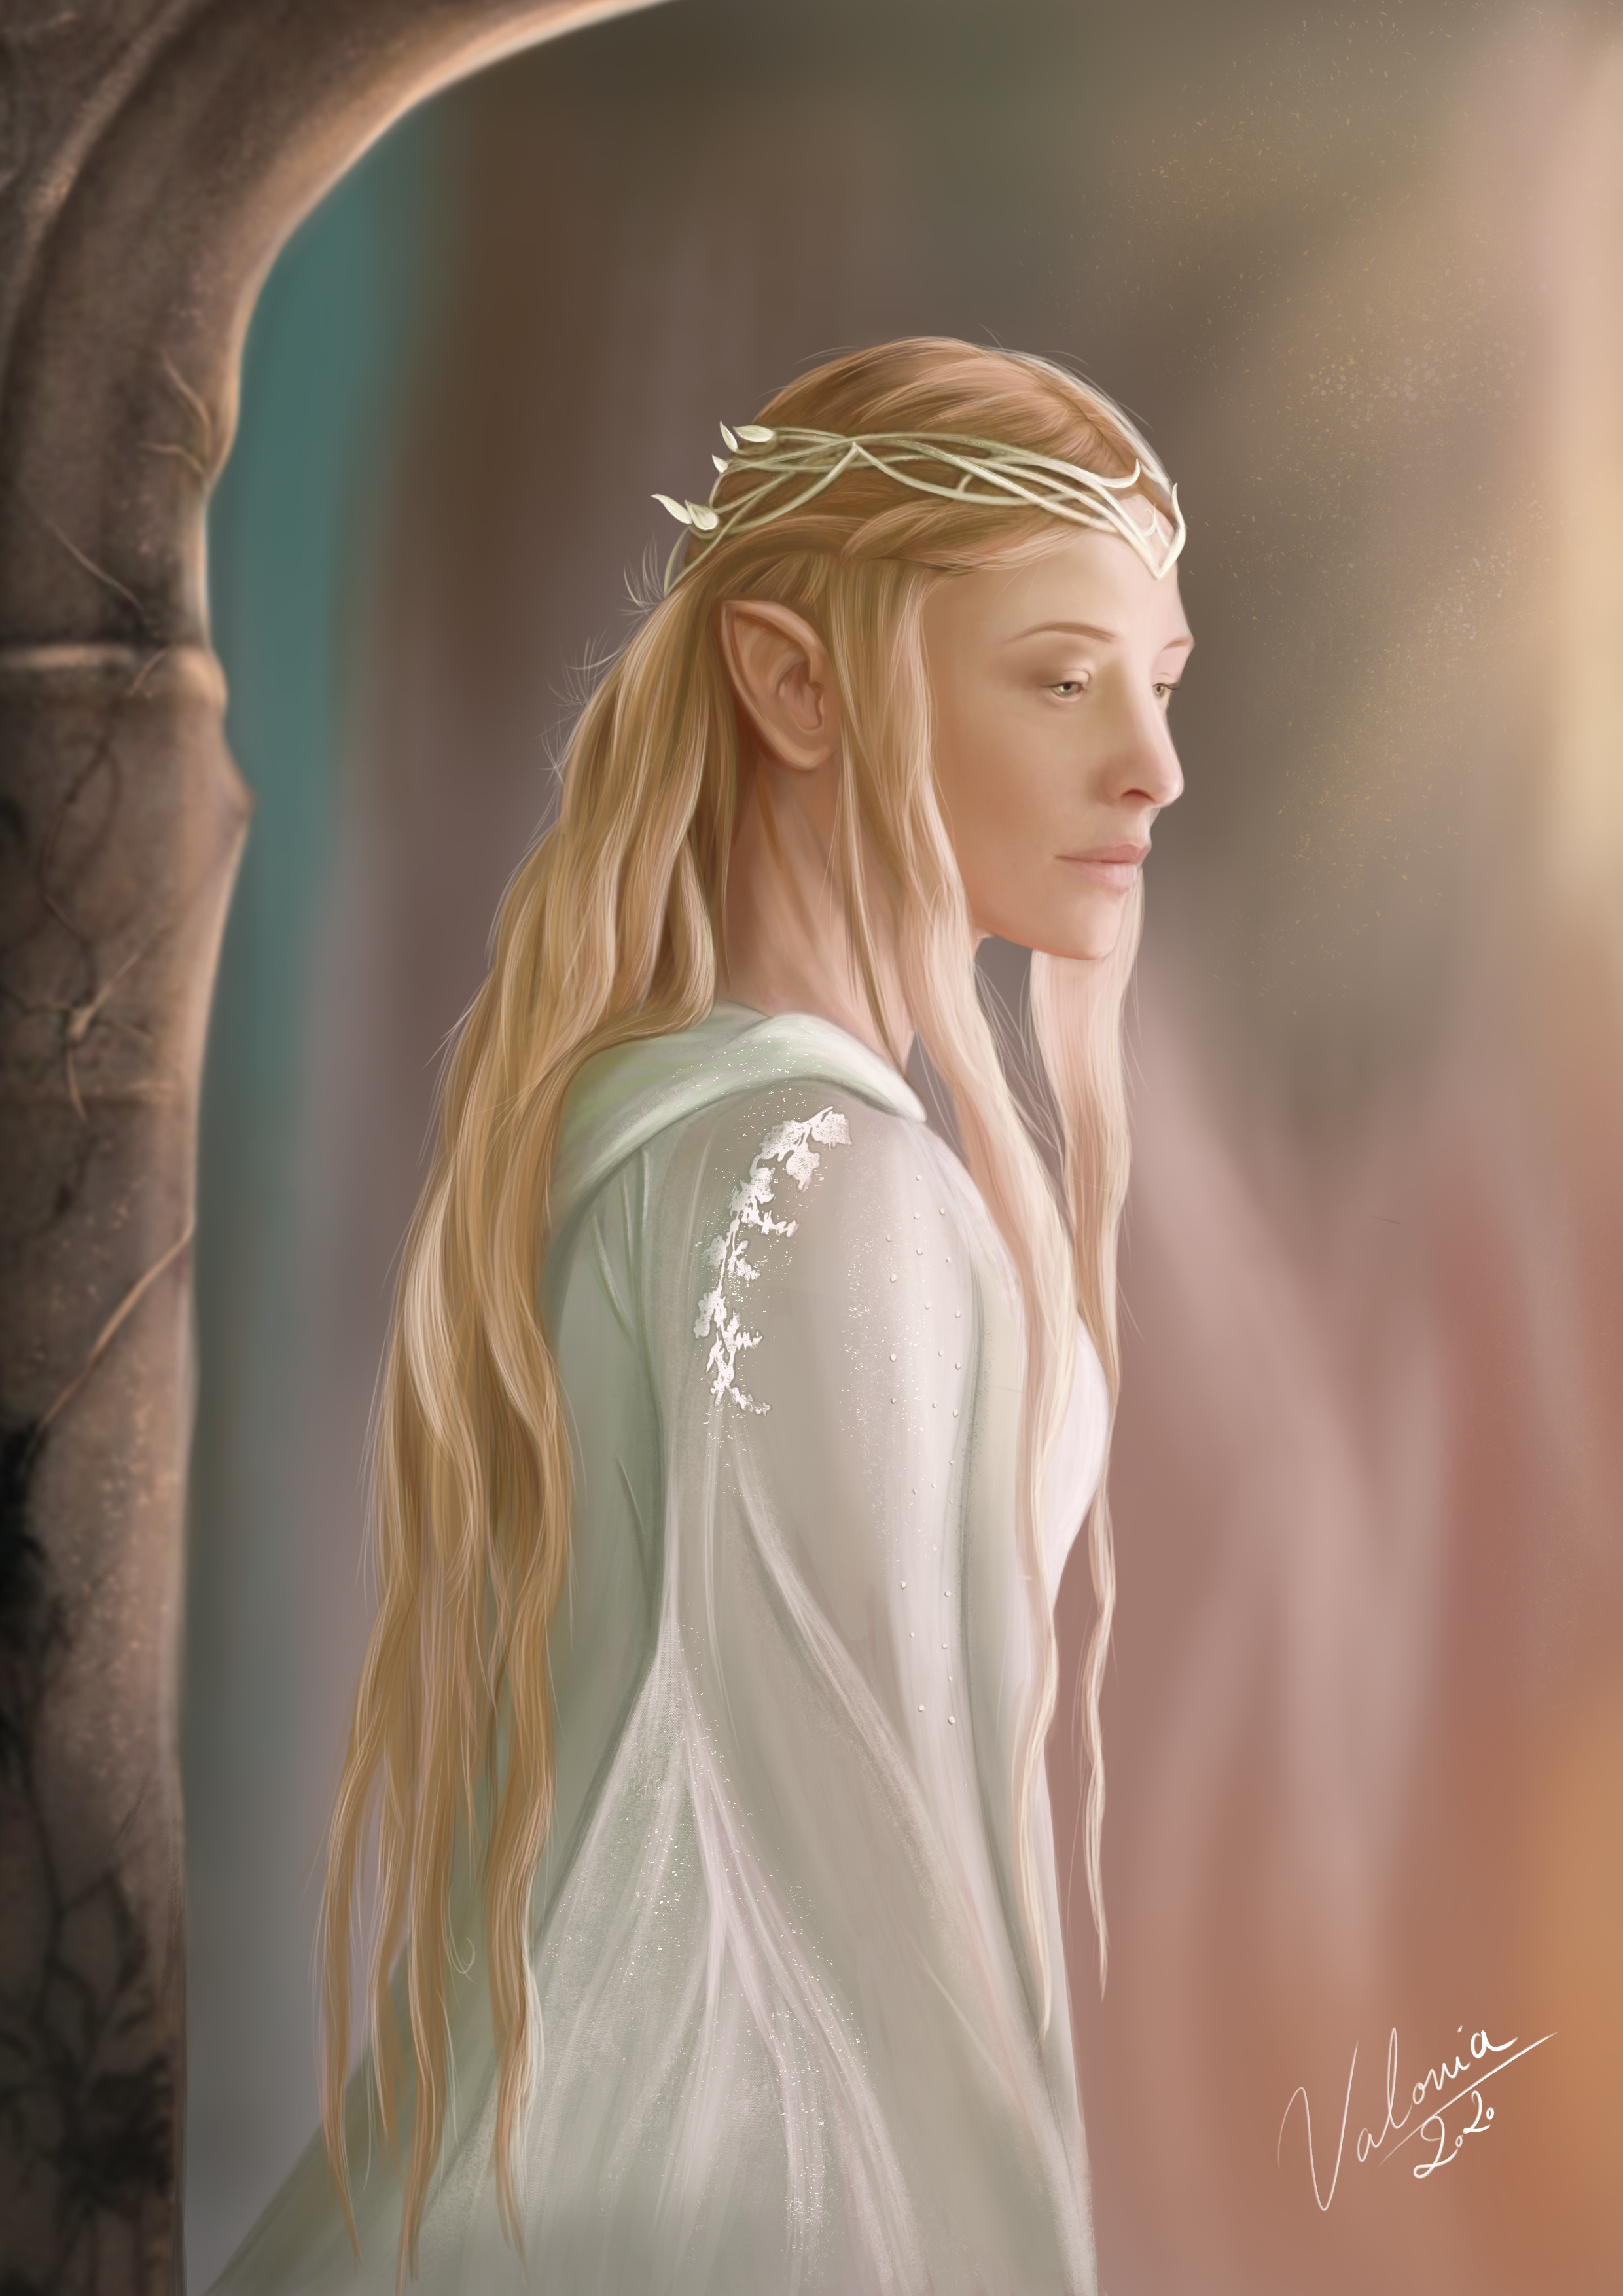 Margaux Valonia Artwork The Lord Of The Rings Fan Art Portrait Display Galadriel Digital Painting Bl 2480x3508